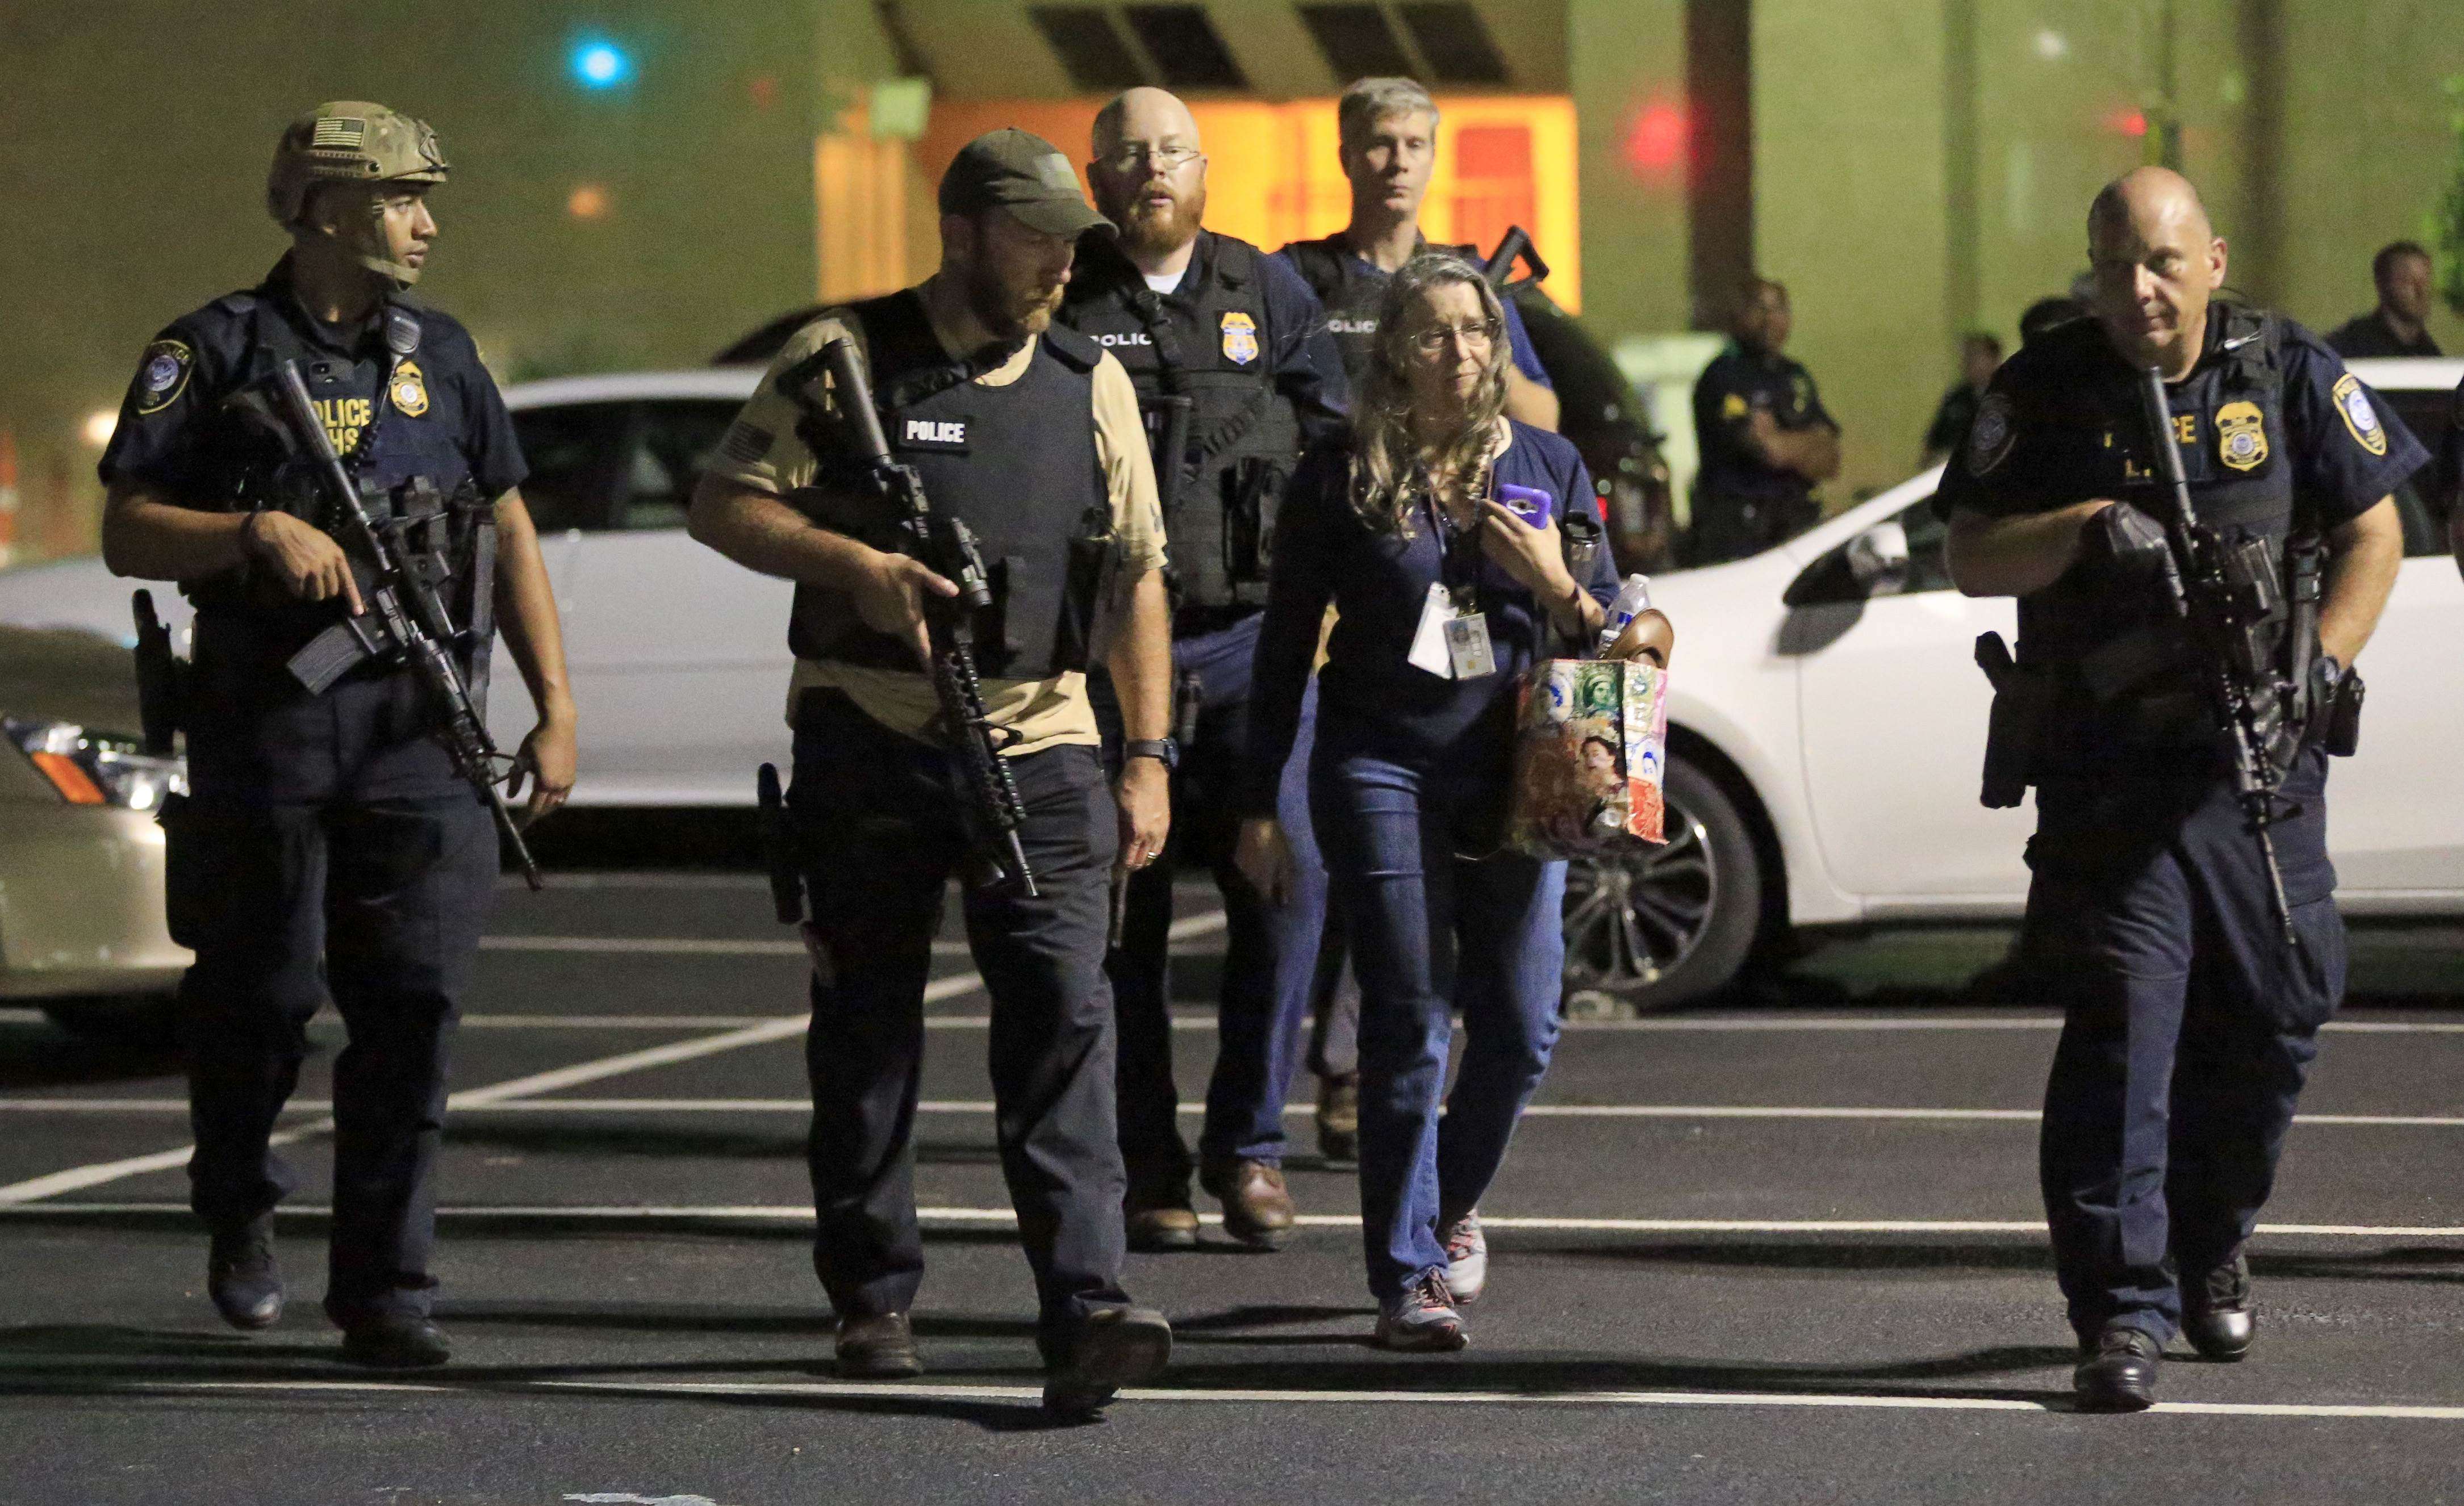 Dallas police officers escort a woman near the scene where eleven Dallas police officers were shot and five have now died on July 7, 2016 in Dallas, Texas. Photo: AFP